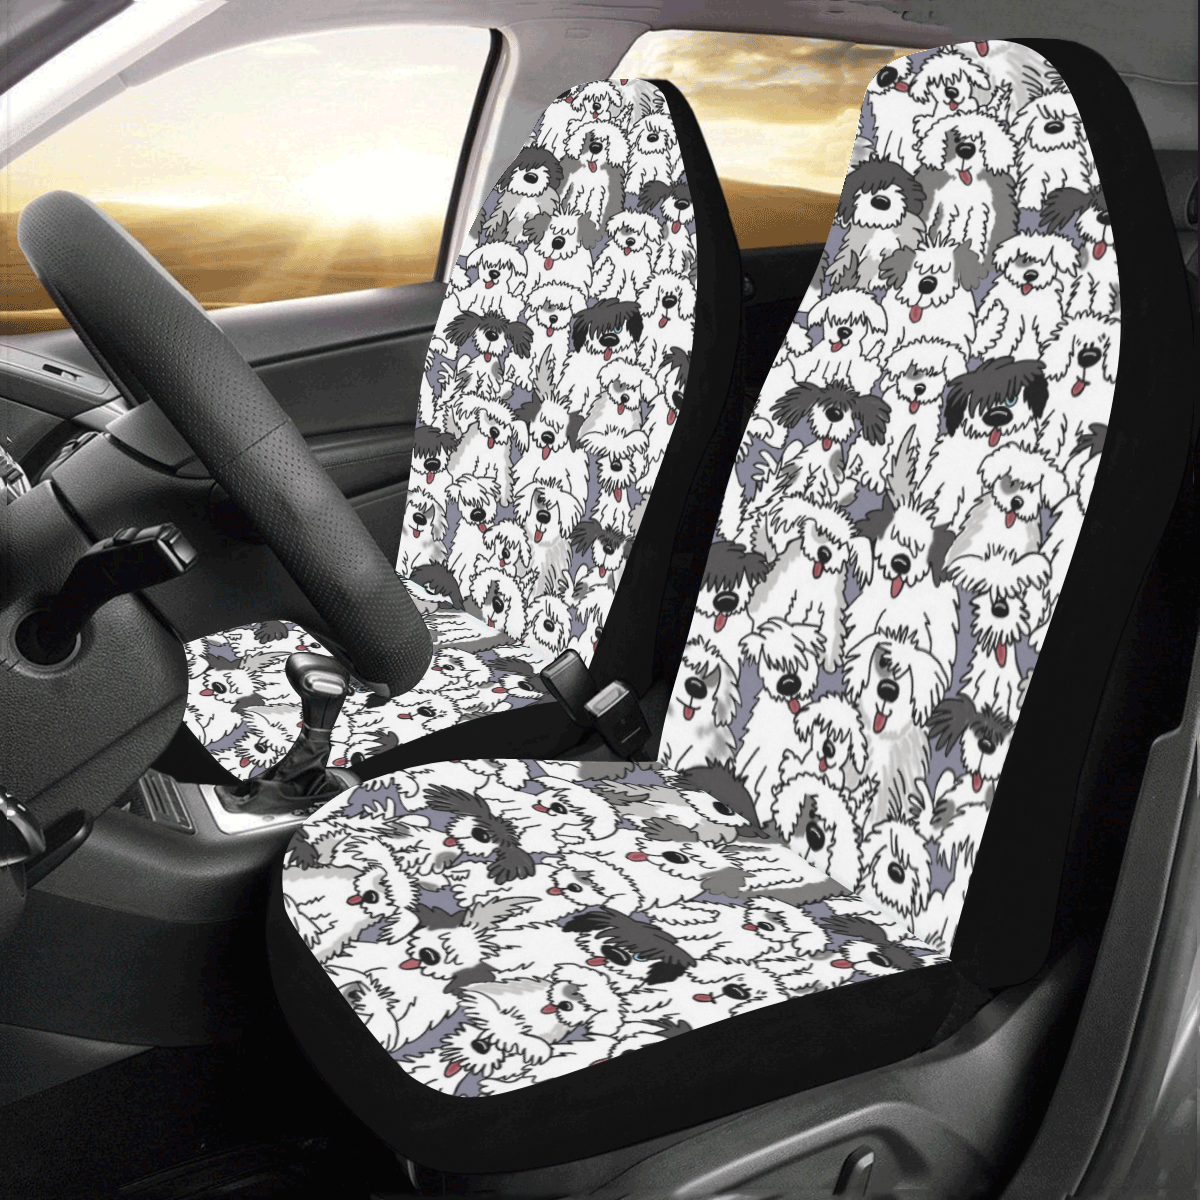 Sheepdig On Watch -Original! Car Seat Covers (Set of 2)